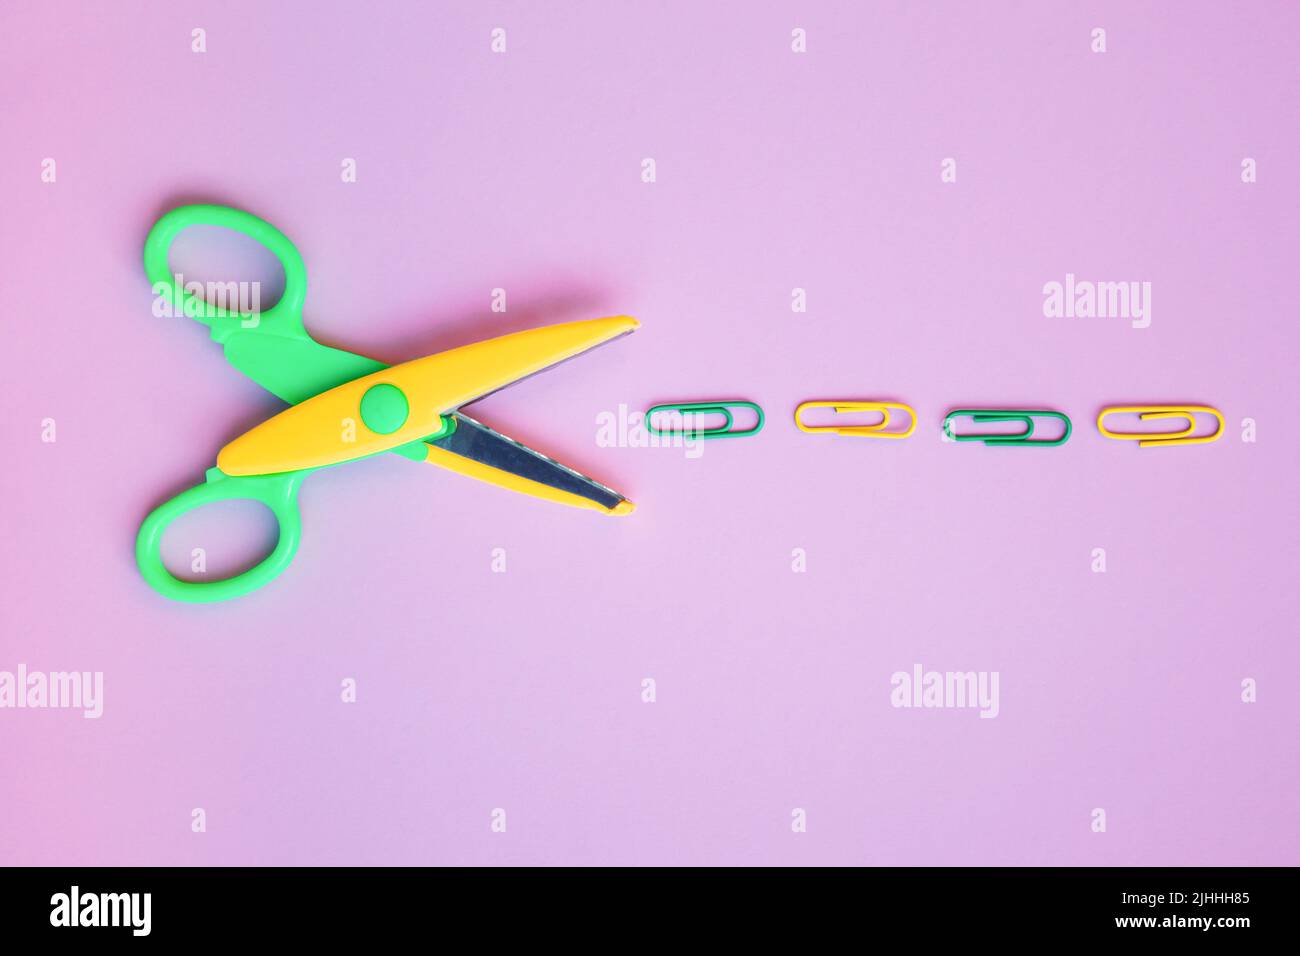 Back to school concept with school supplies, scissors, paper clips on pastel purple background. Top view with copy space. Flat lay. Stock Photo